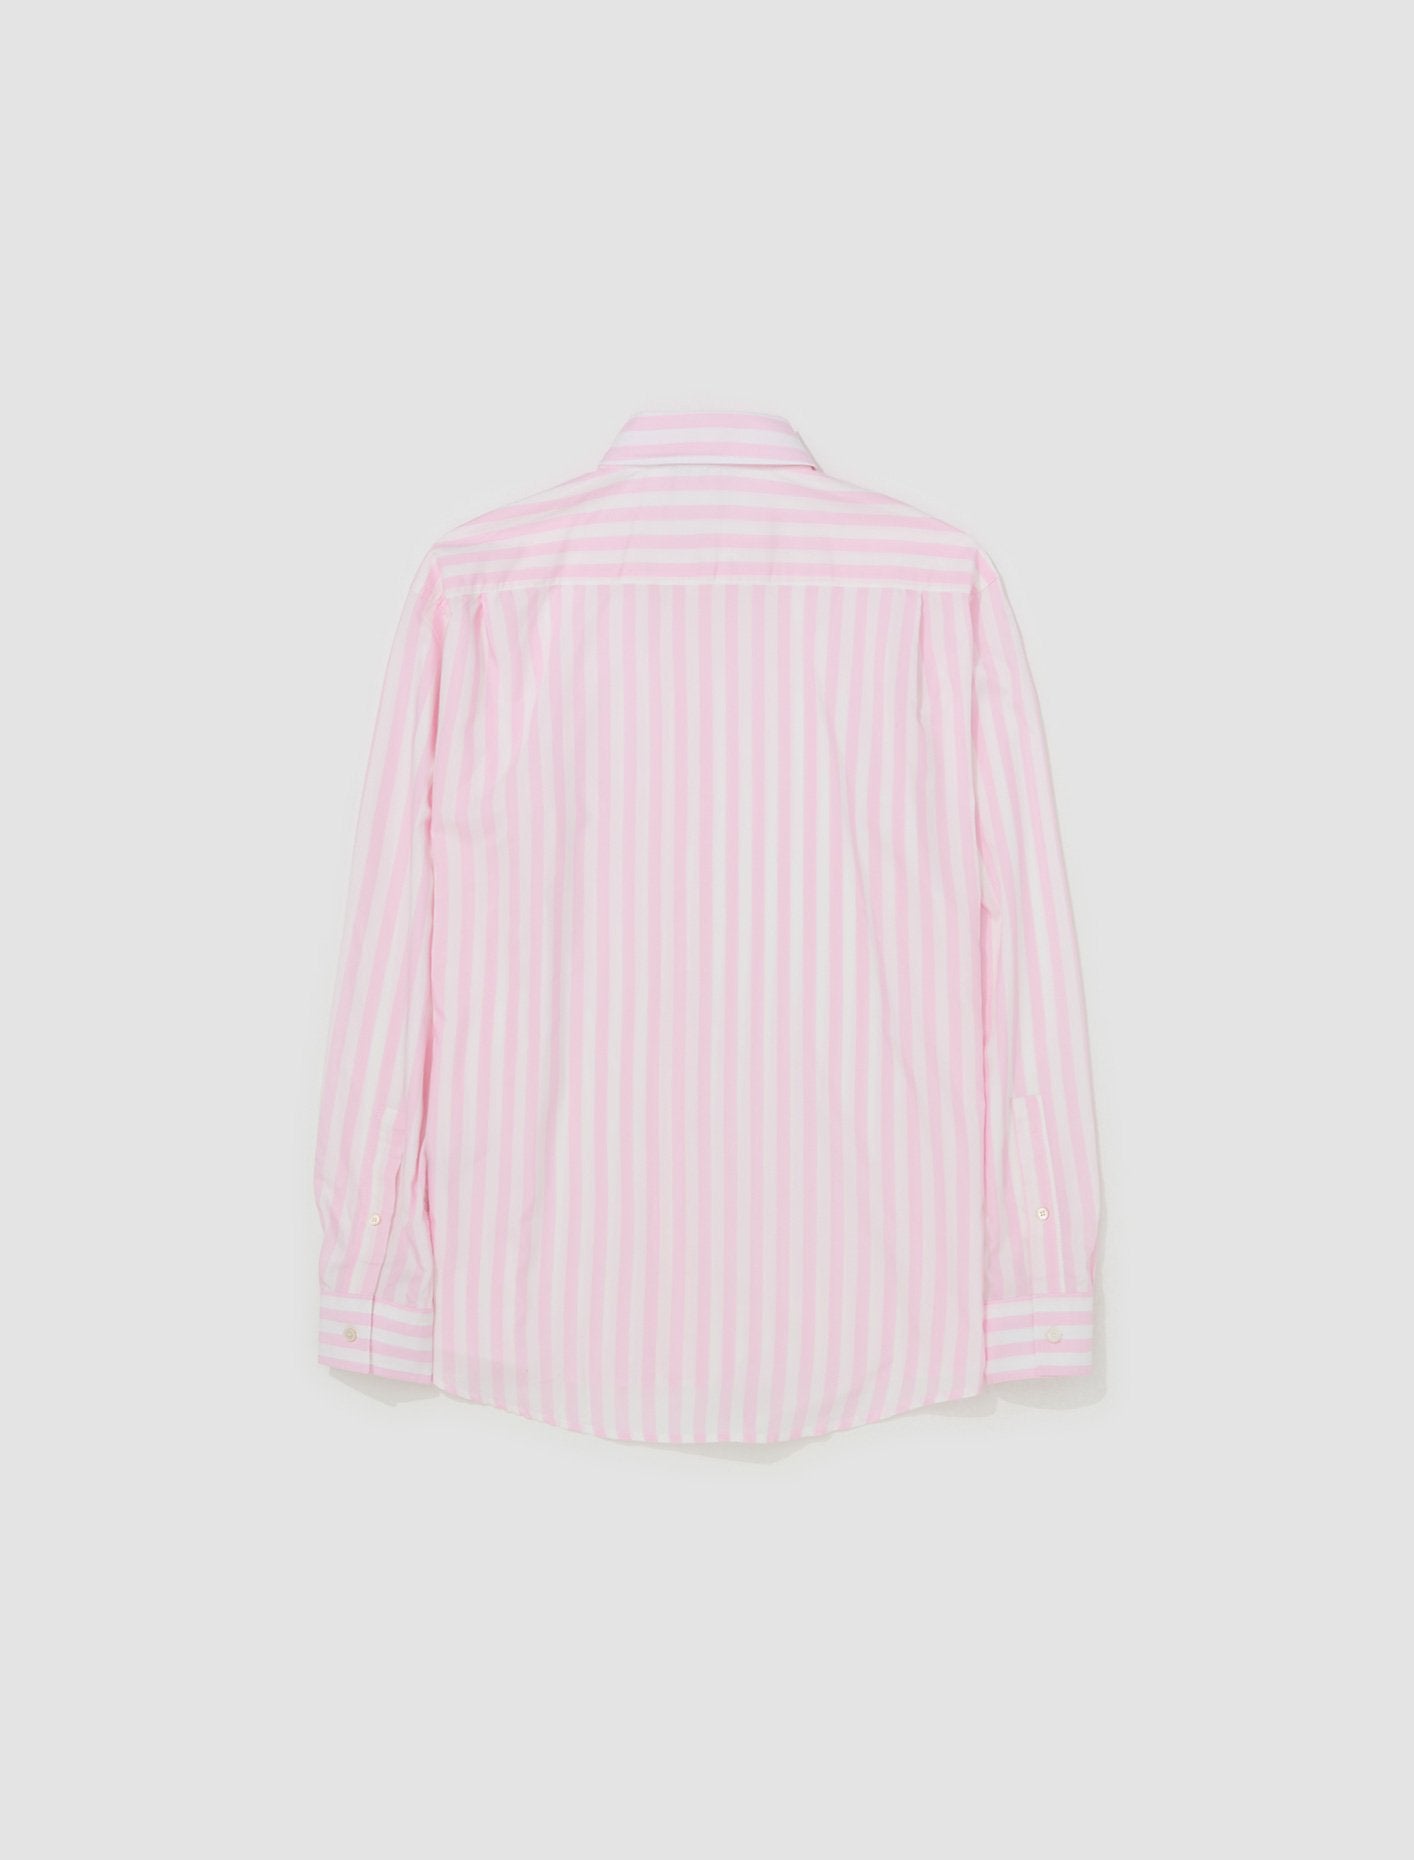 Striped Shirt in Pink & White